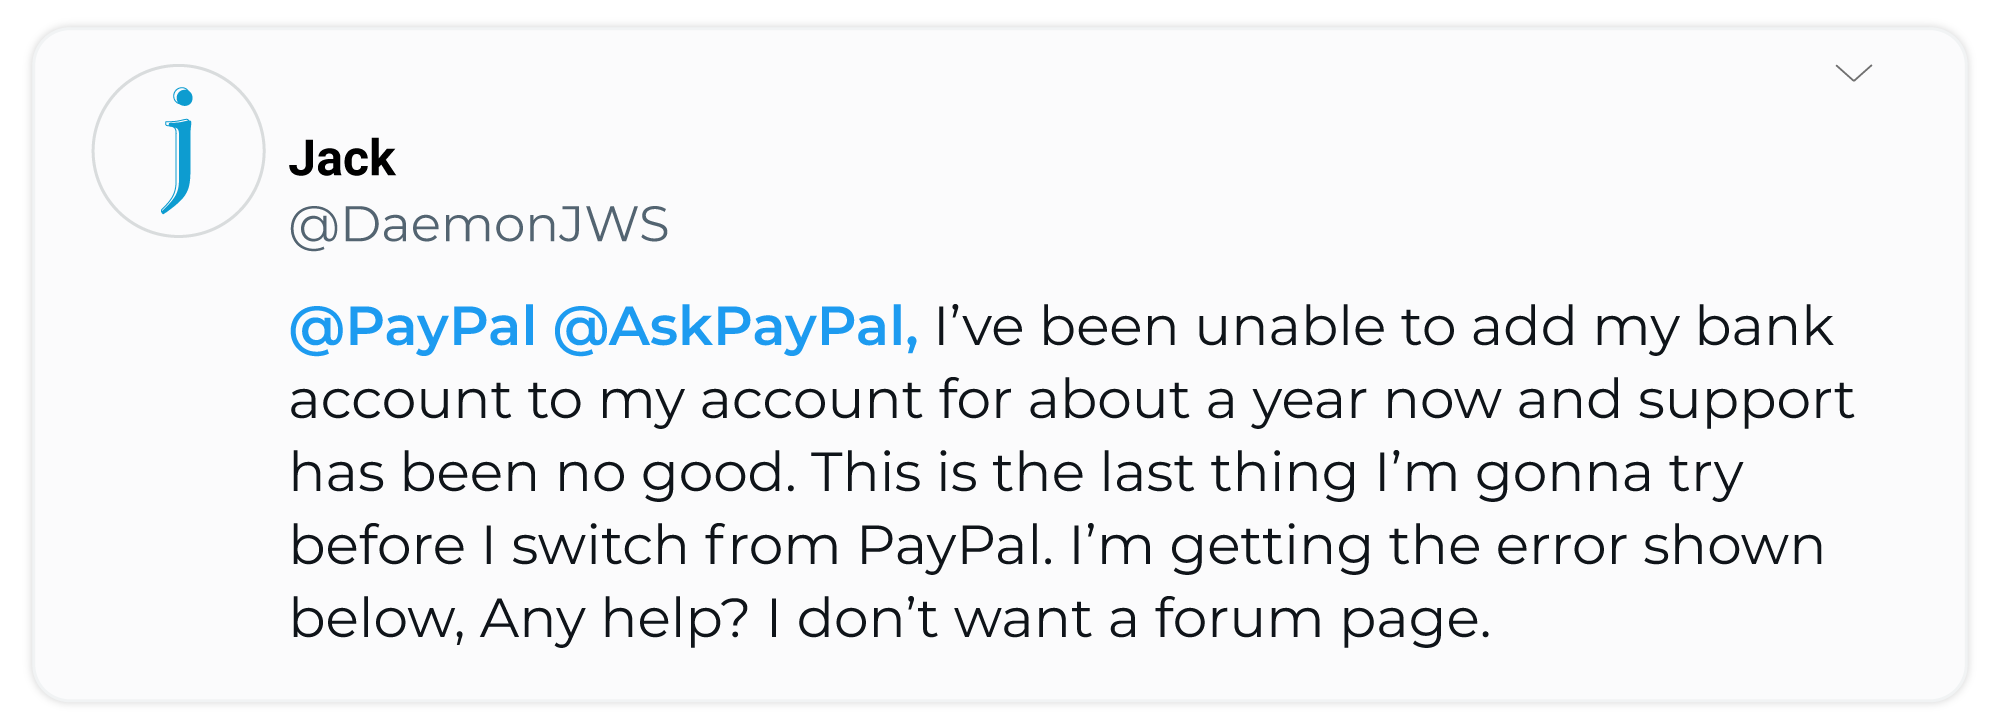 PayPal was asked for immediate assistance on Twitter